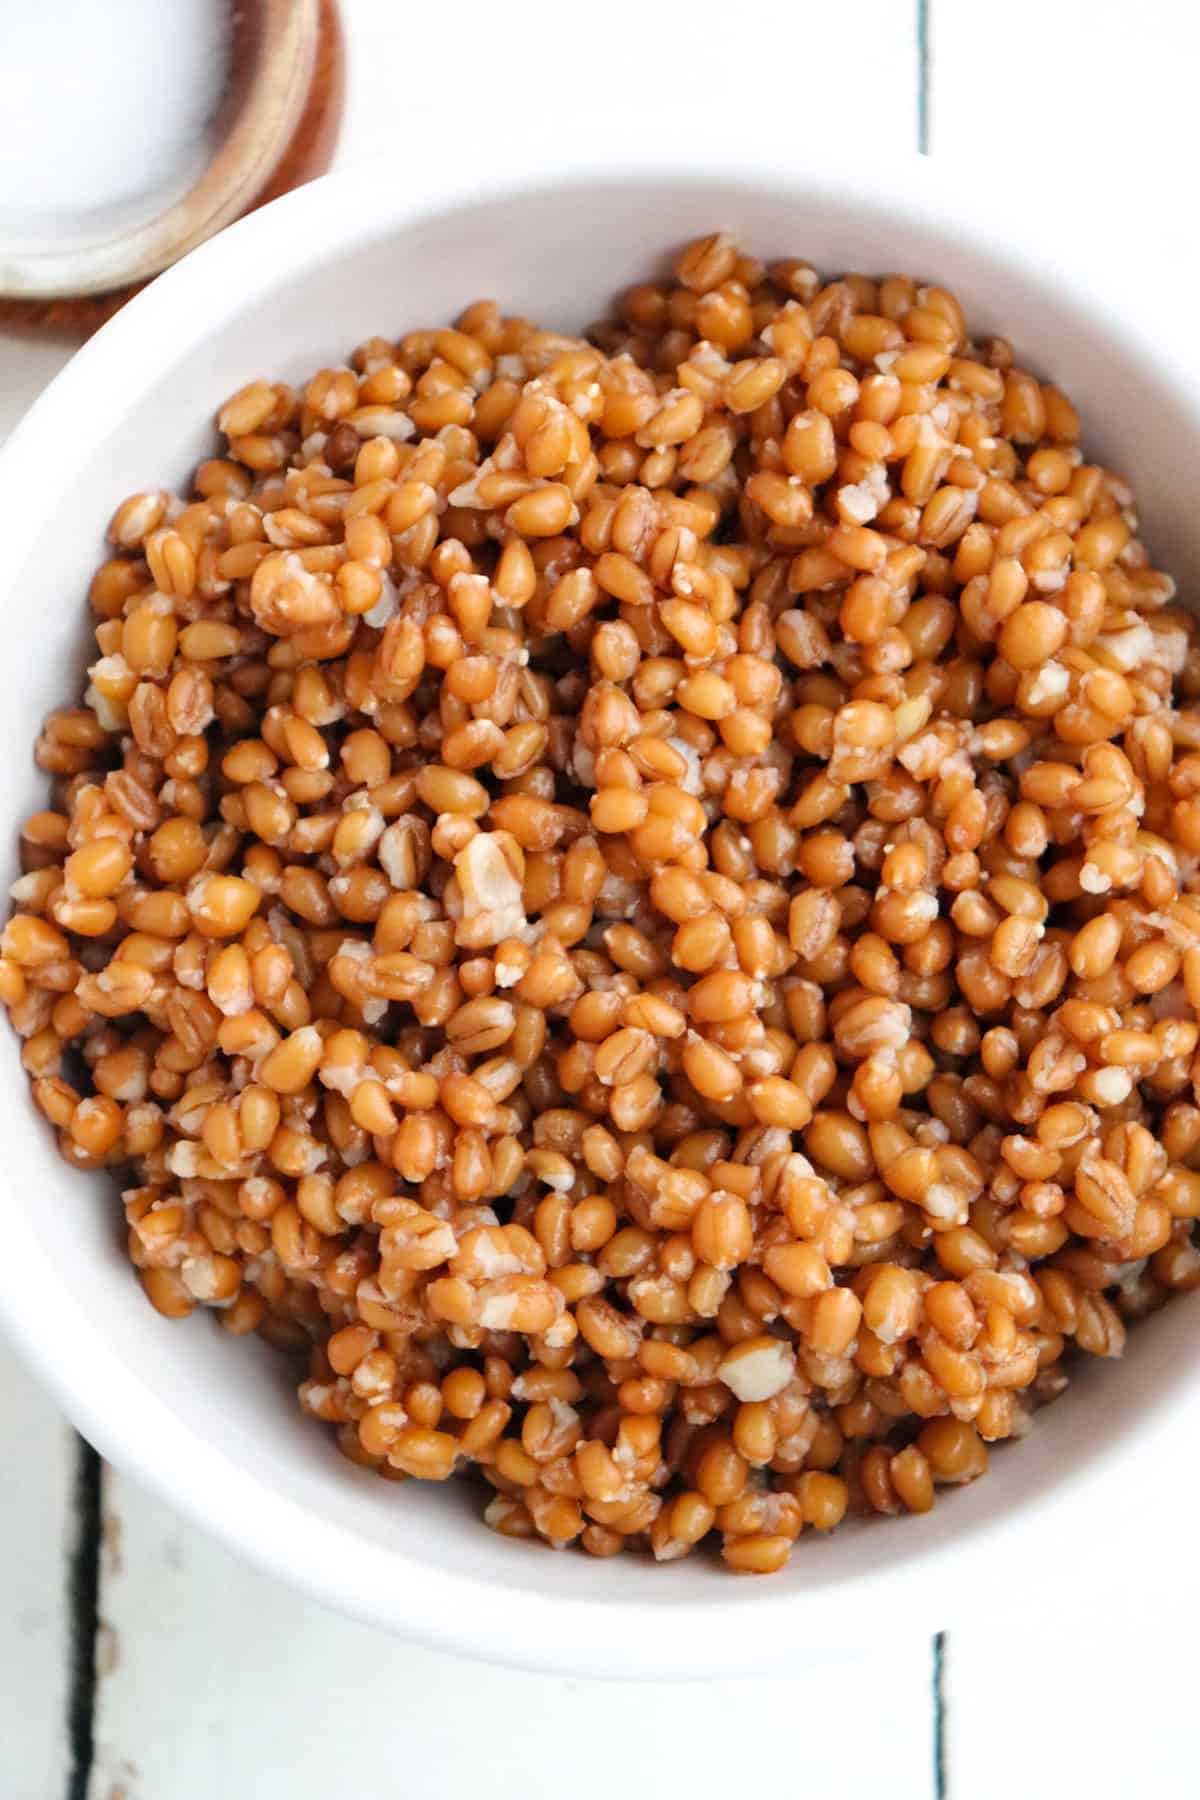 wheat berries up close in a white bowl.